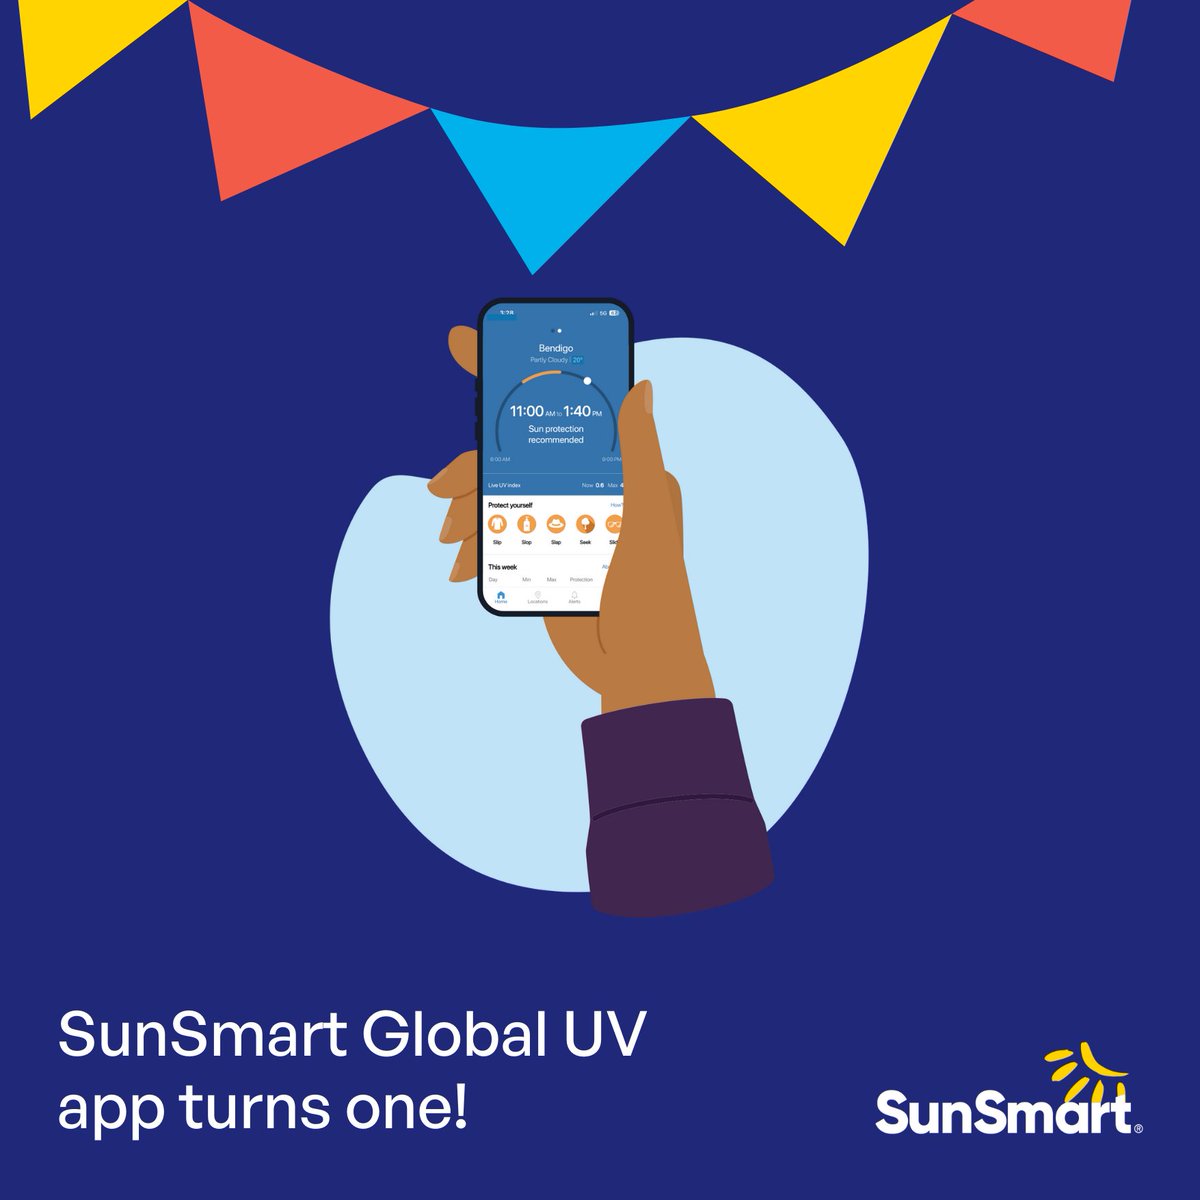 The SunSmart Global UV app celebrates ONE YEAR of helping people know their UV levels no matter where they are in Australia or the world 🌎 Read more and get the app: bit.ly/48h7NQd @SunSmartVIC @BOM_au @ARPANSANews @WHO @WMO @UNEP @Deakin @deakinresearch #UVindex